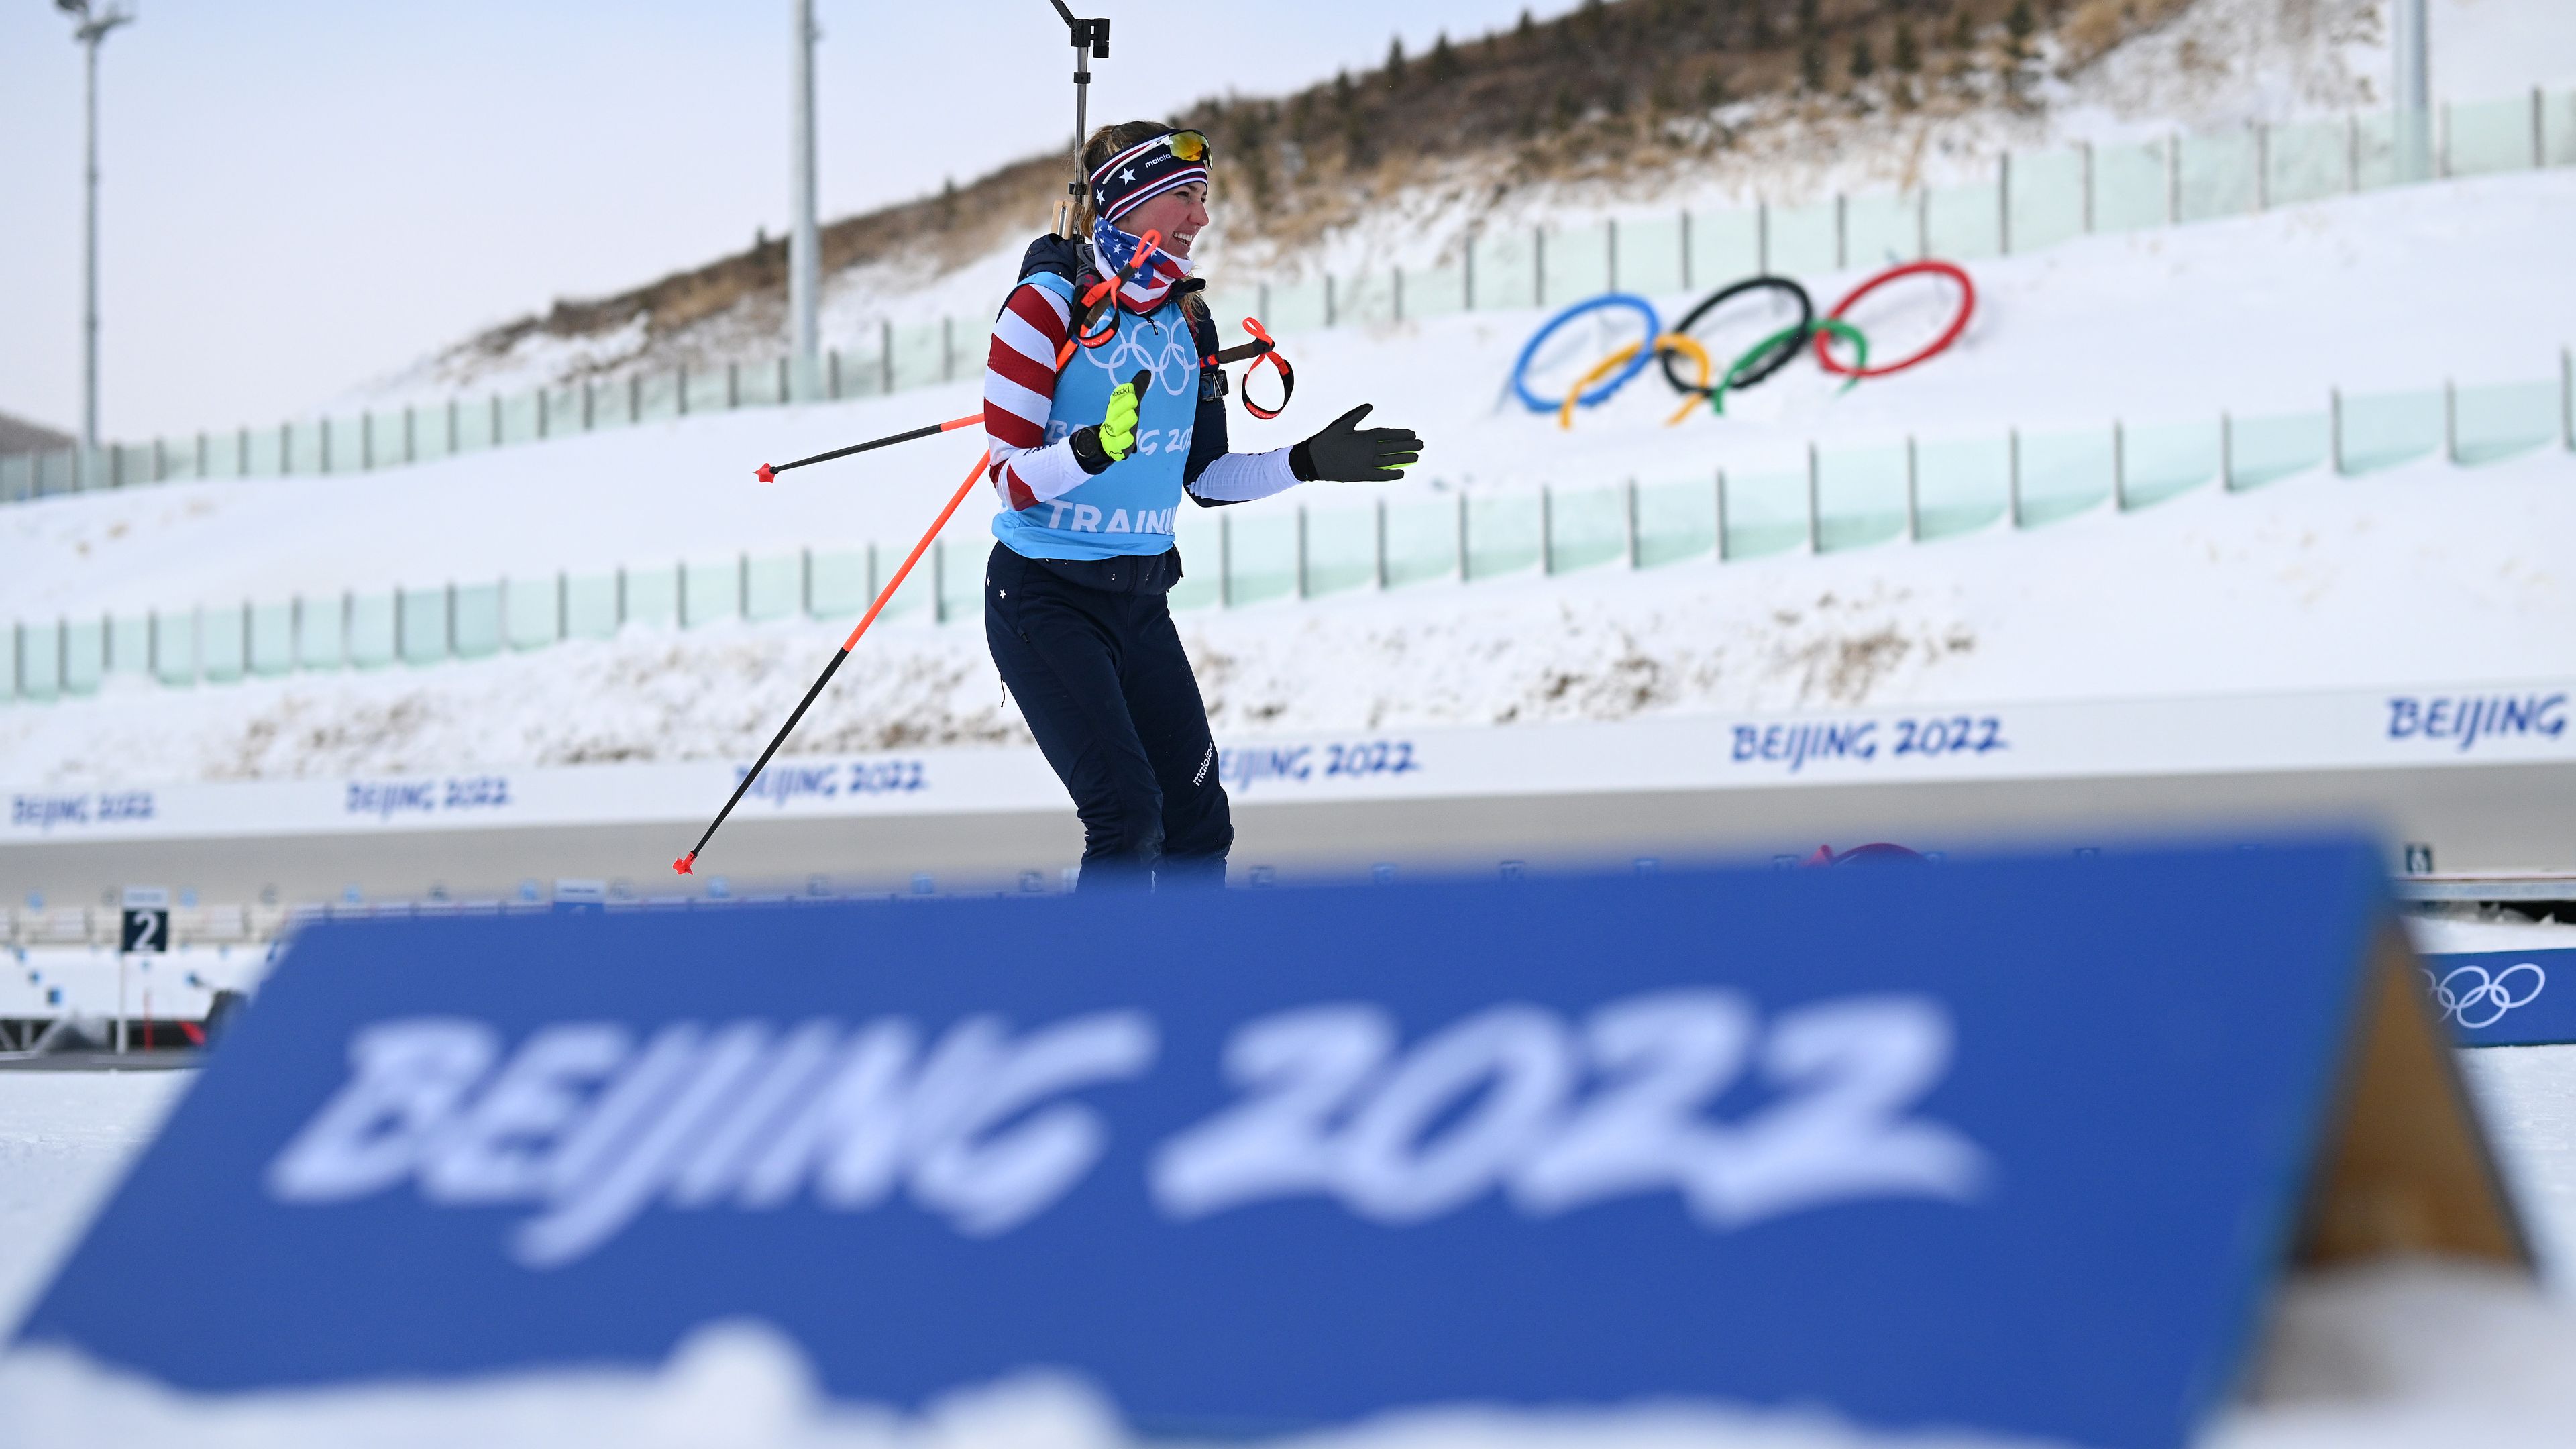 Athlete of Team United States skis during the Biathlon Training Session at National Biathlon Centre ahead of Beijing 2022 Winter Olympic Games.